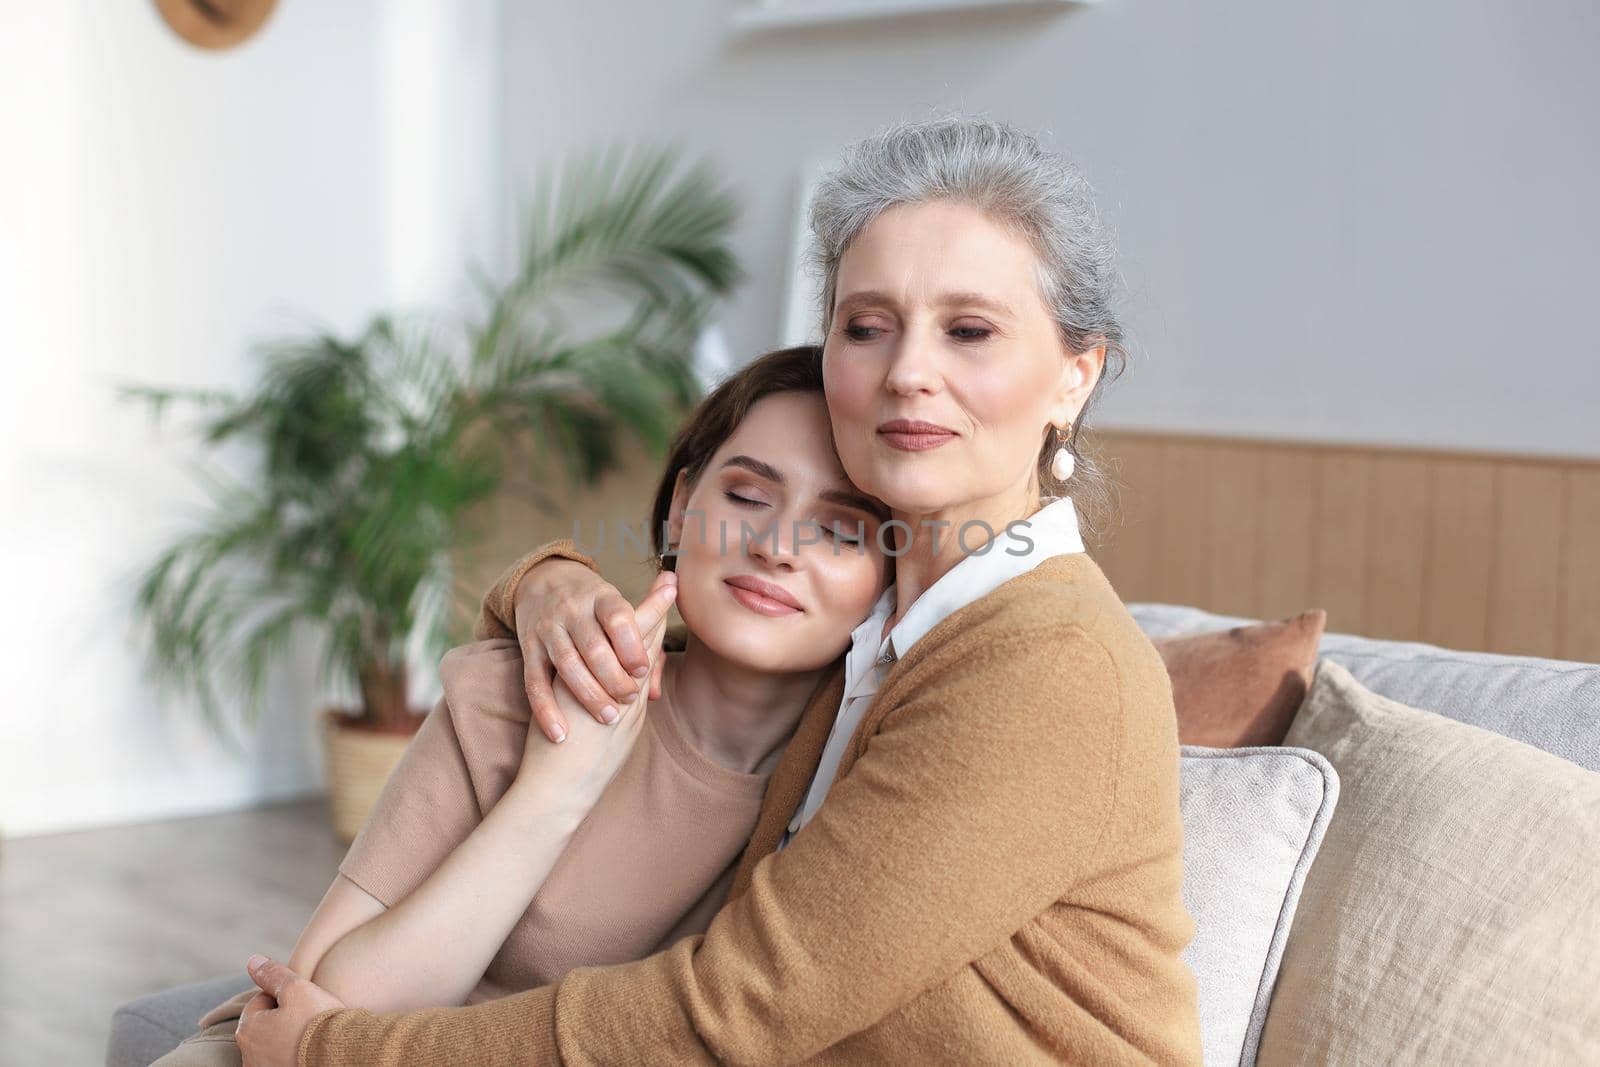 Cheerful young woman is embracing her middle aged mother with closed eyes hugging, touching cheeks, sitting on couch at home. Happy trusted relations. Family concept